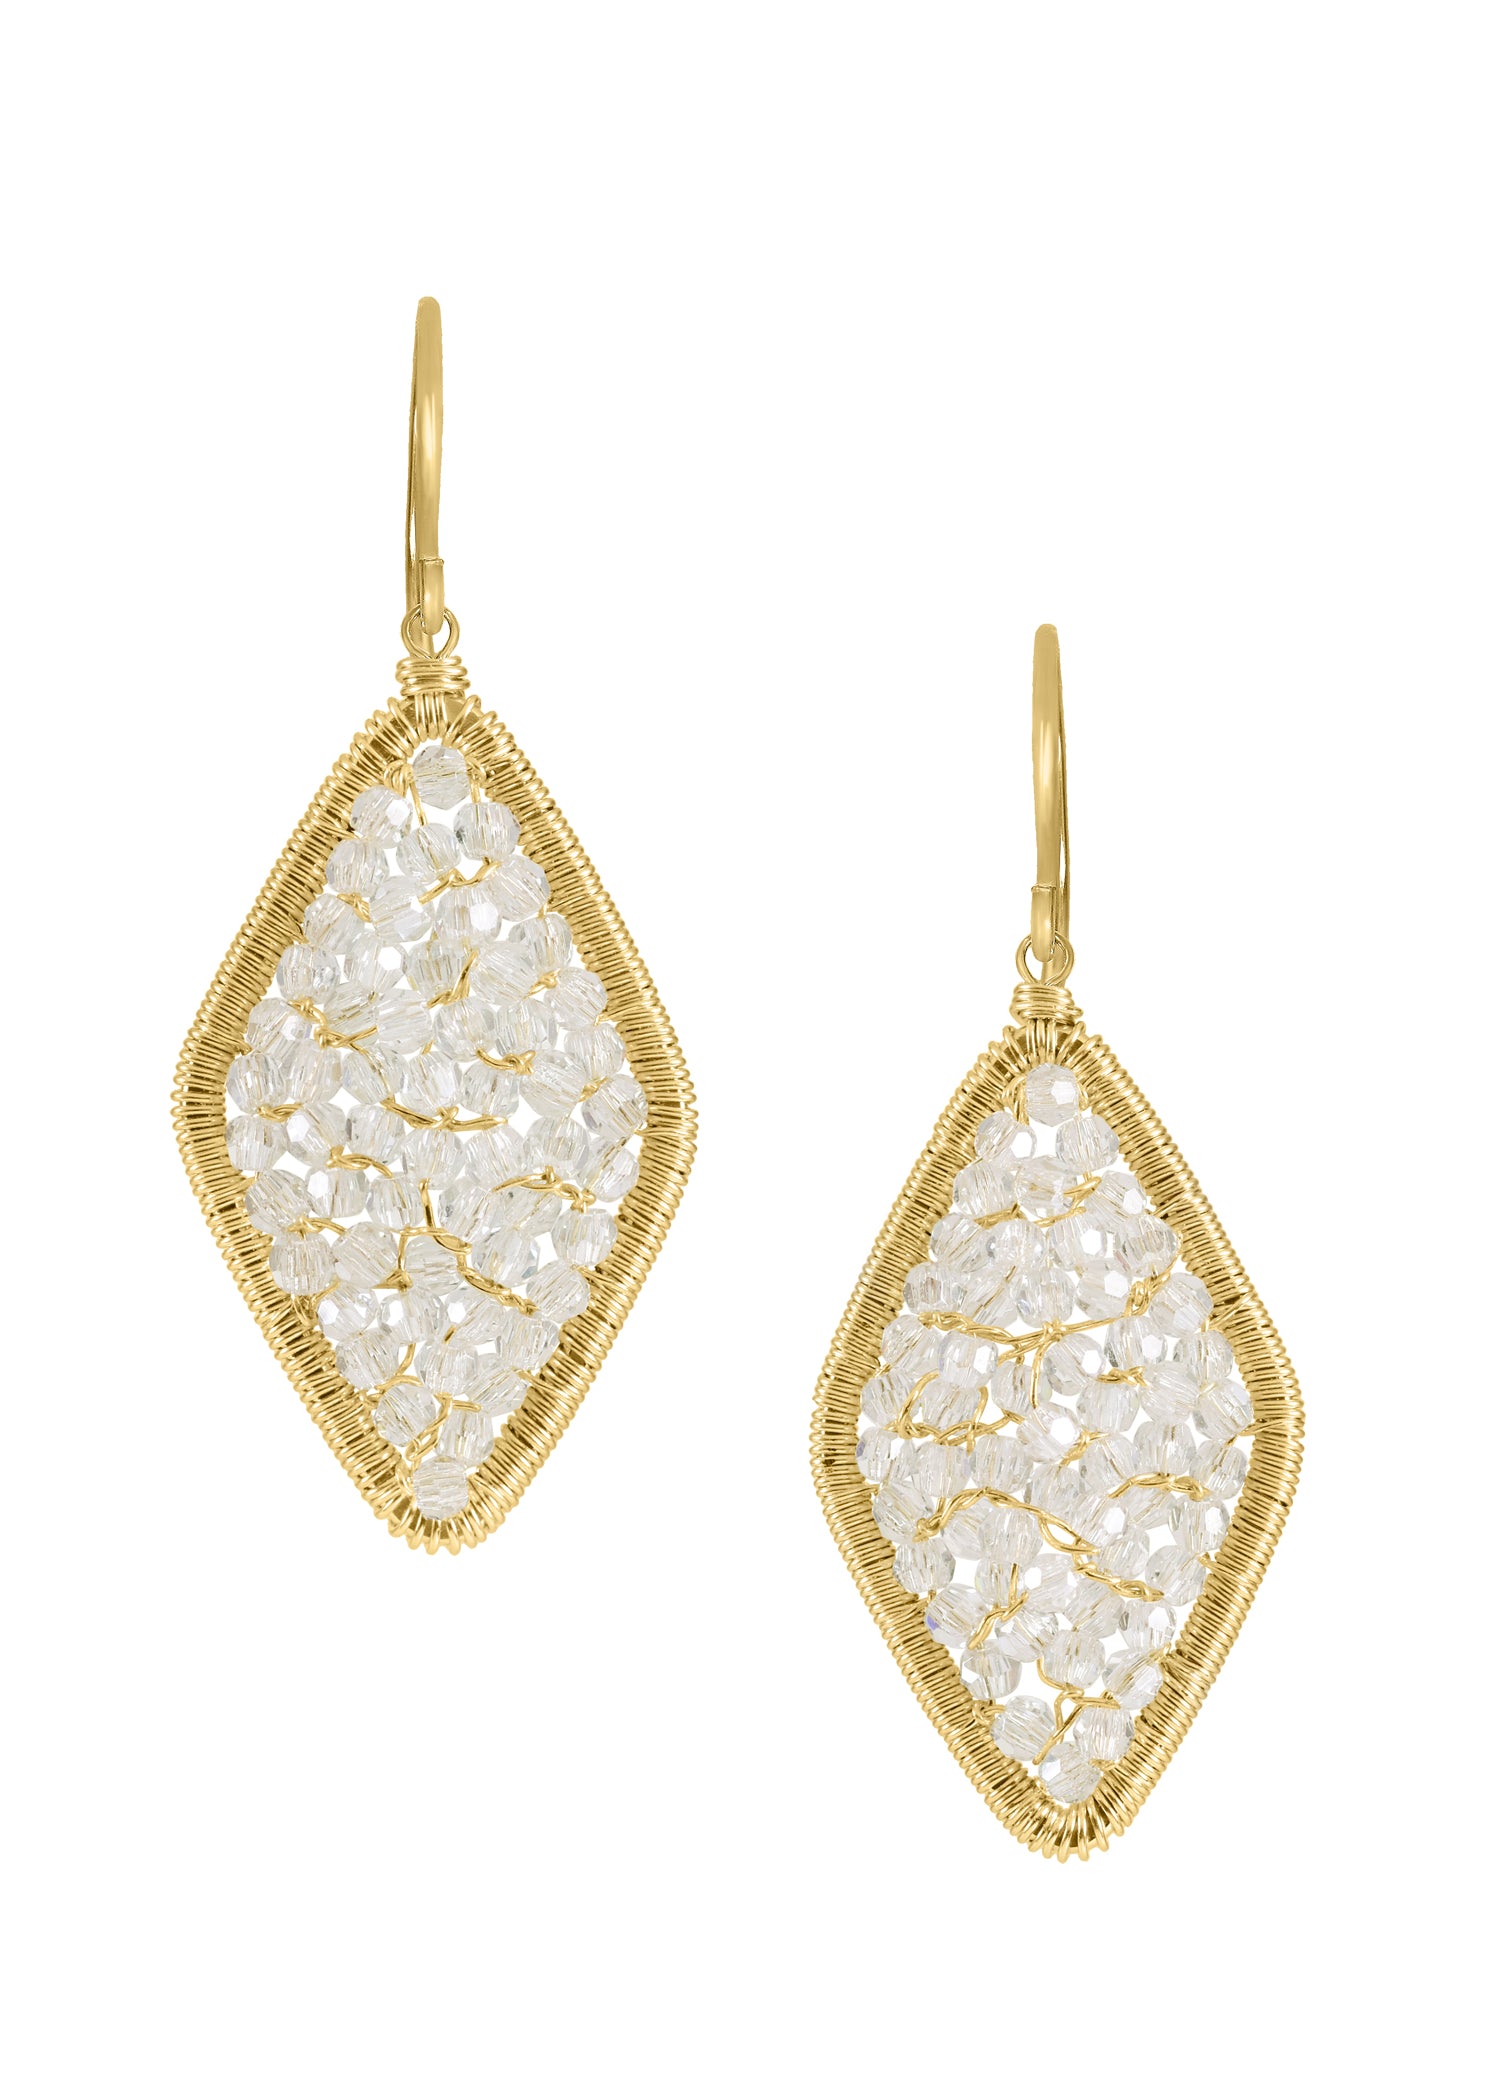 Crystal 14k gold fill Earrings measure 1-3/8" in length (including the ear wires) and 9/16" in width at the widest point Handmade in our Los Angeles studio